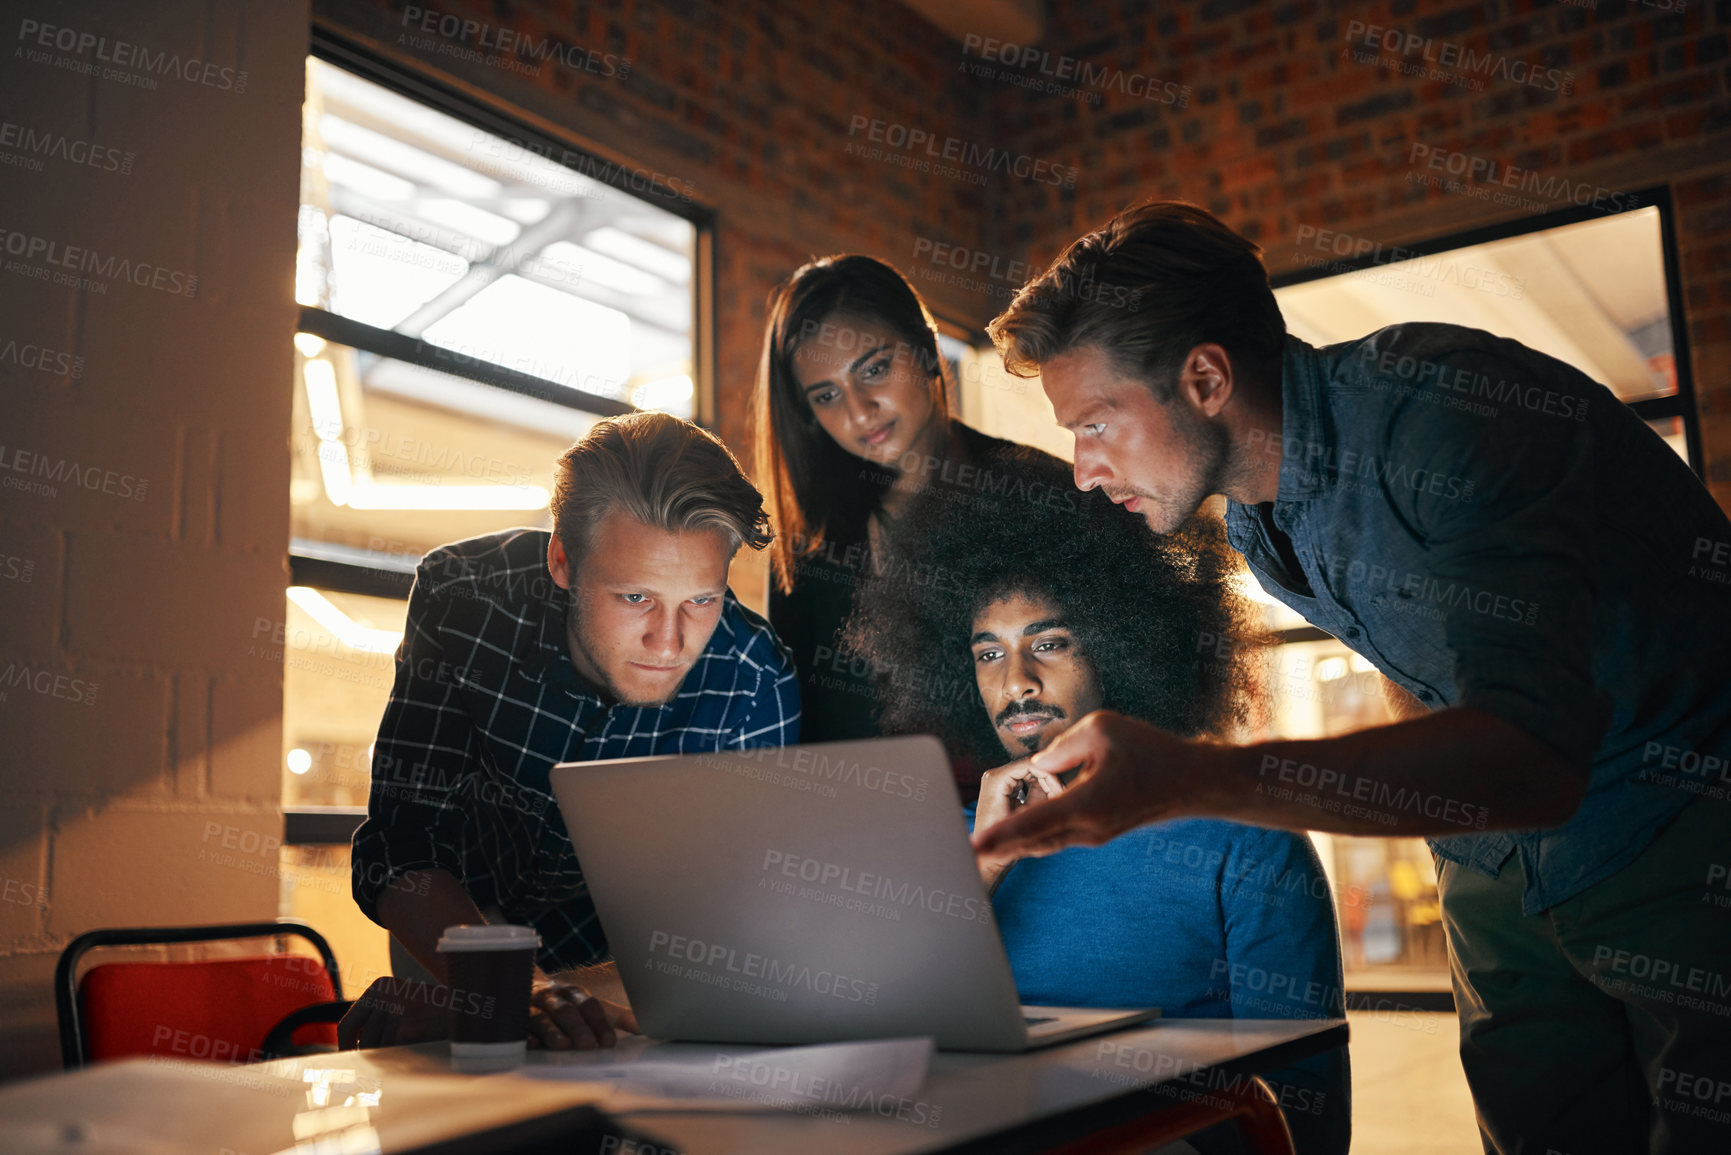 Buy stock photo Shot of a group of designers working together on a laptop